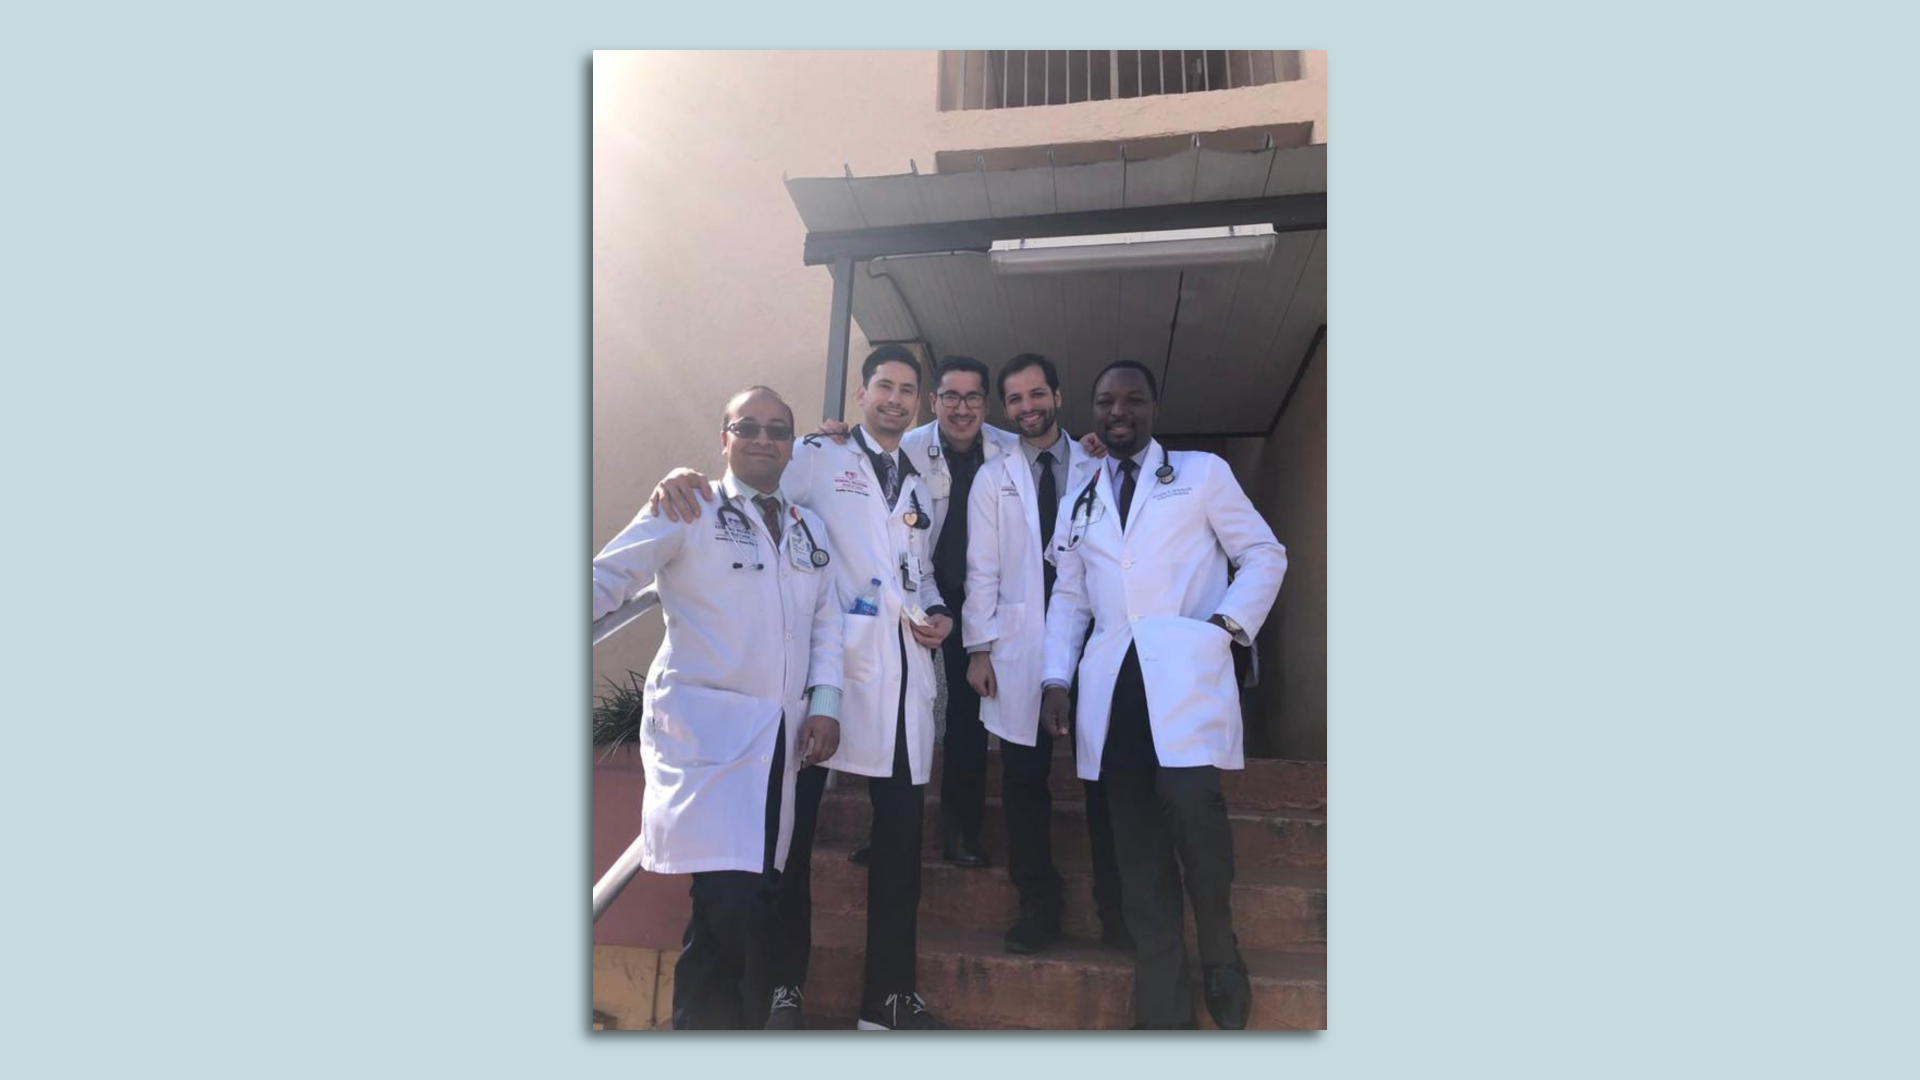 A group of doctors in white scrubs stands together 